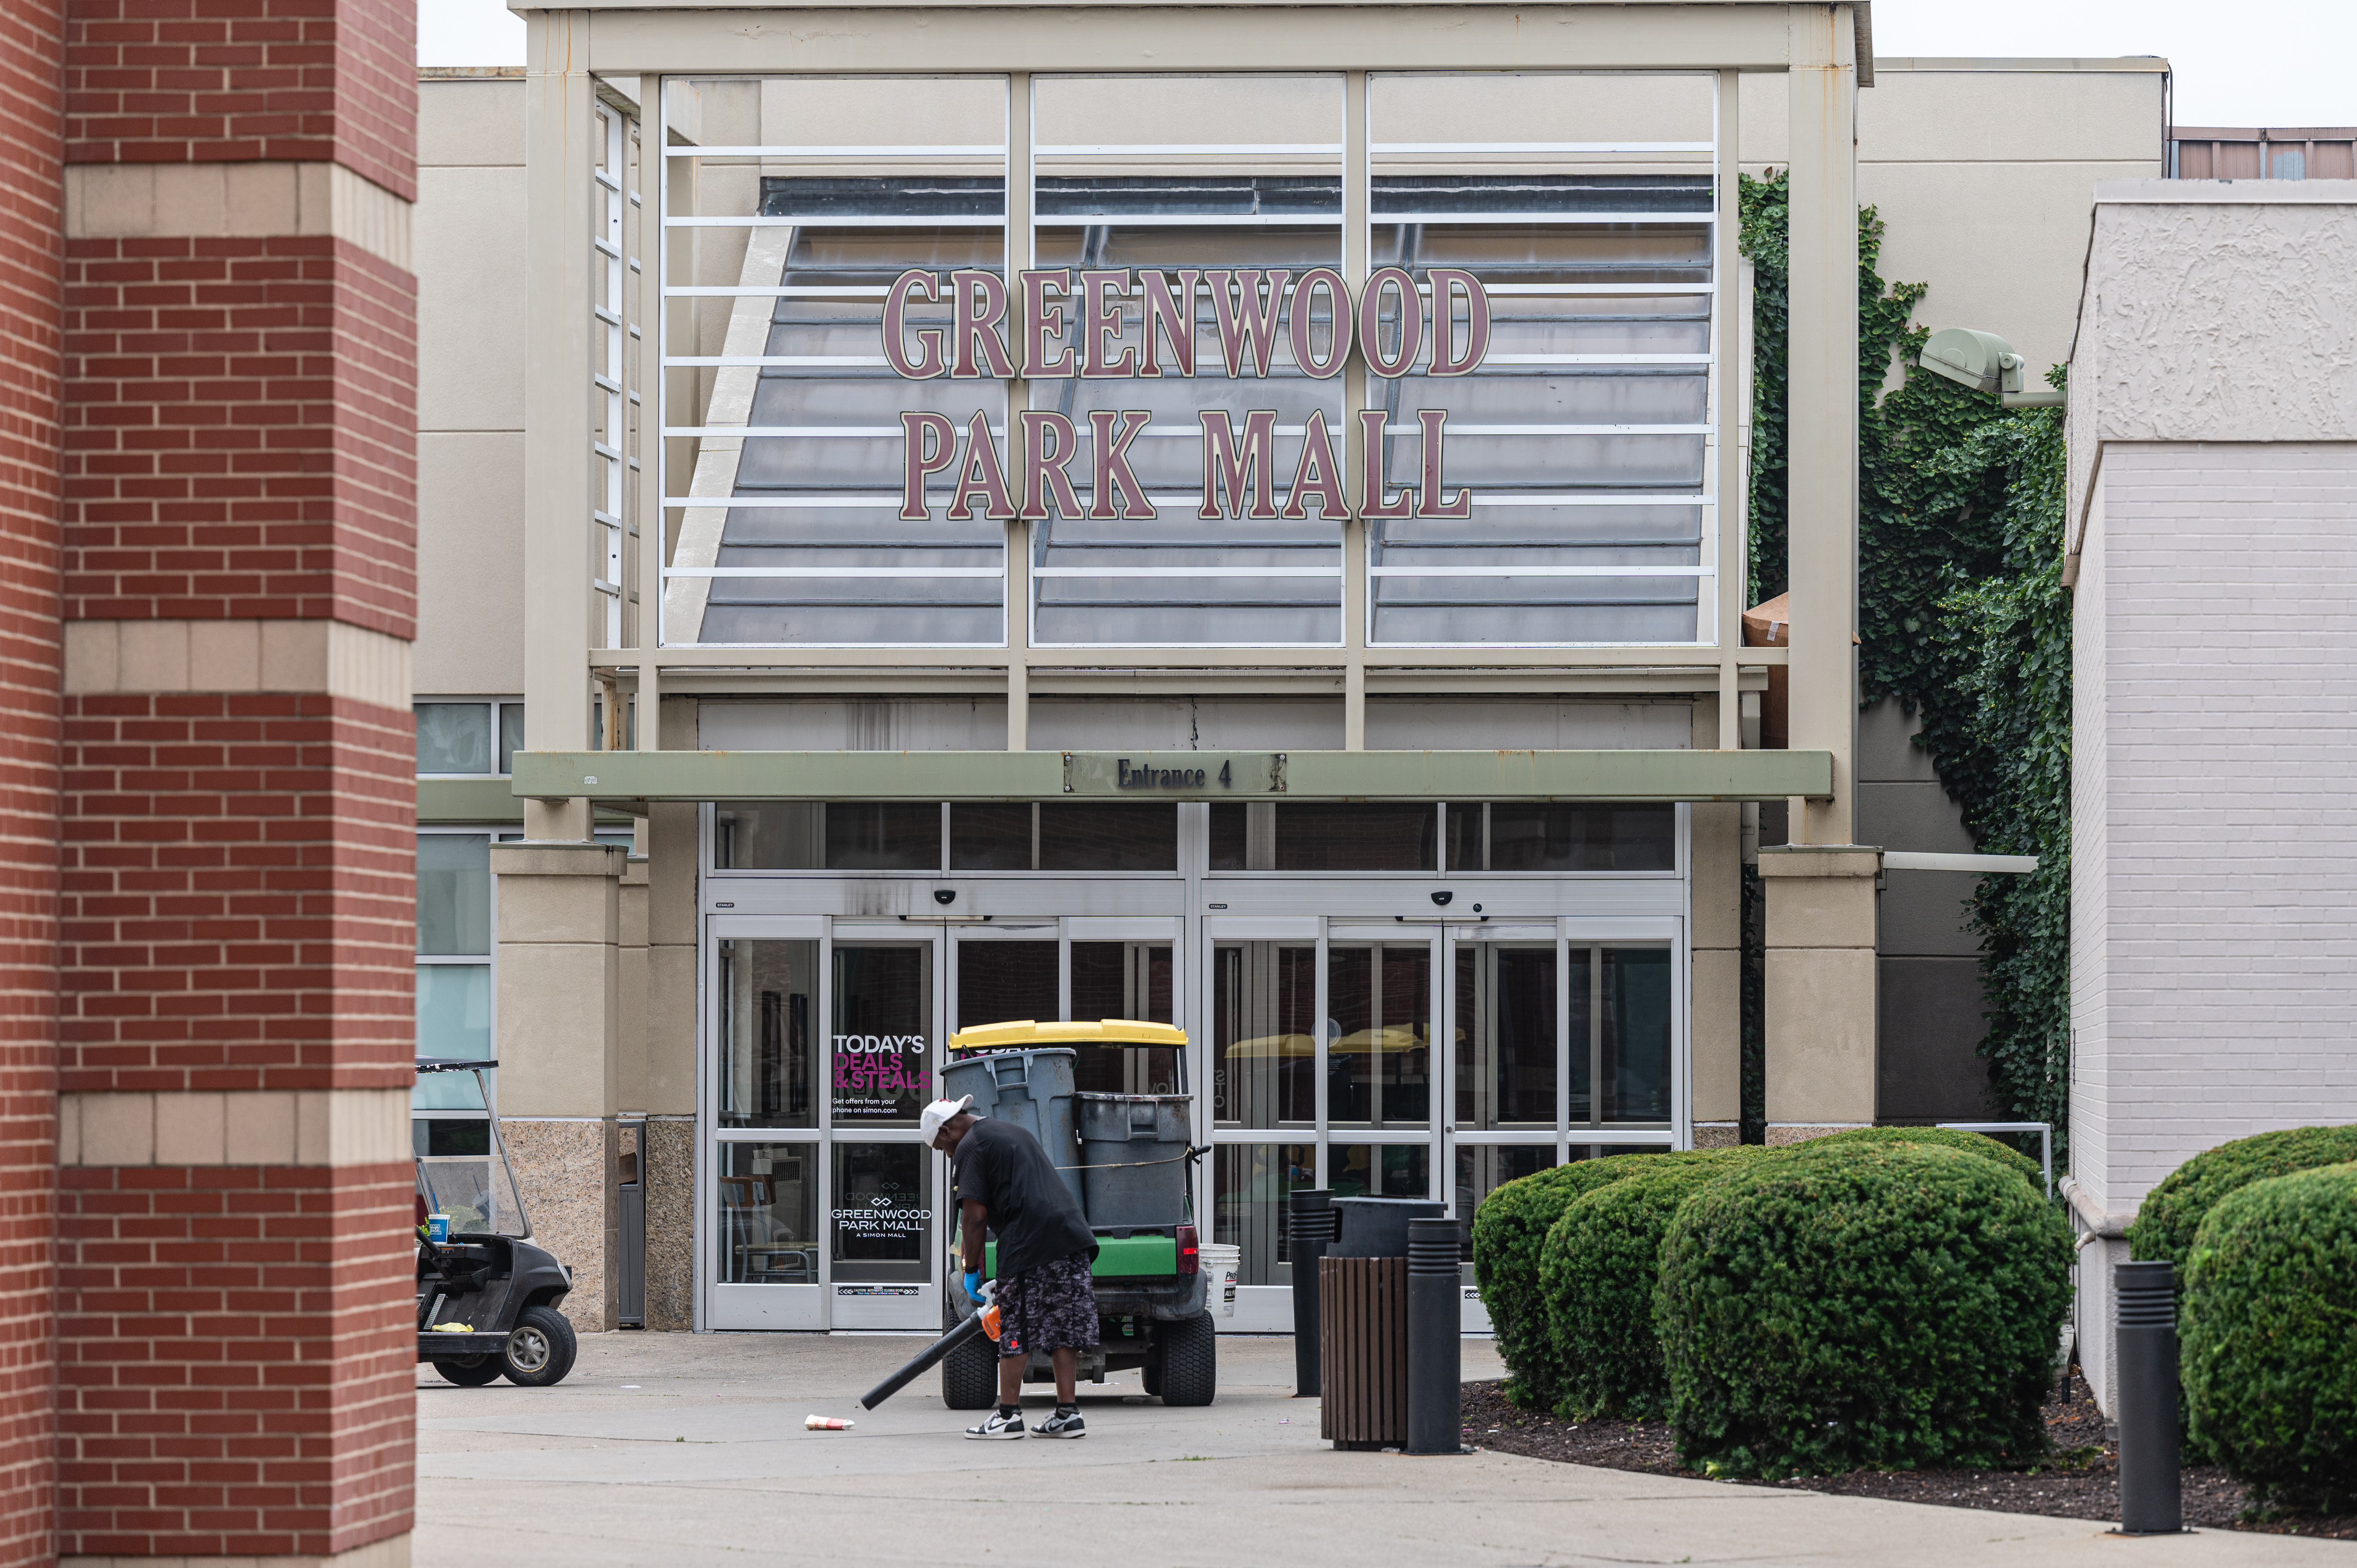 A worker cleans up outside the Greenwood Park Mall